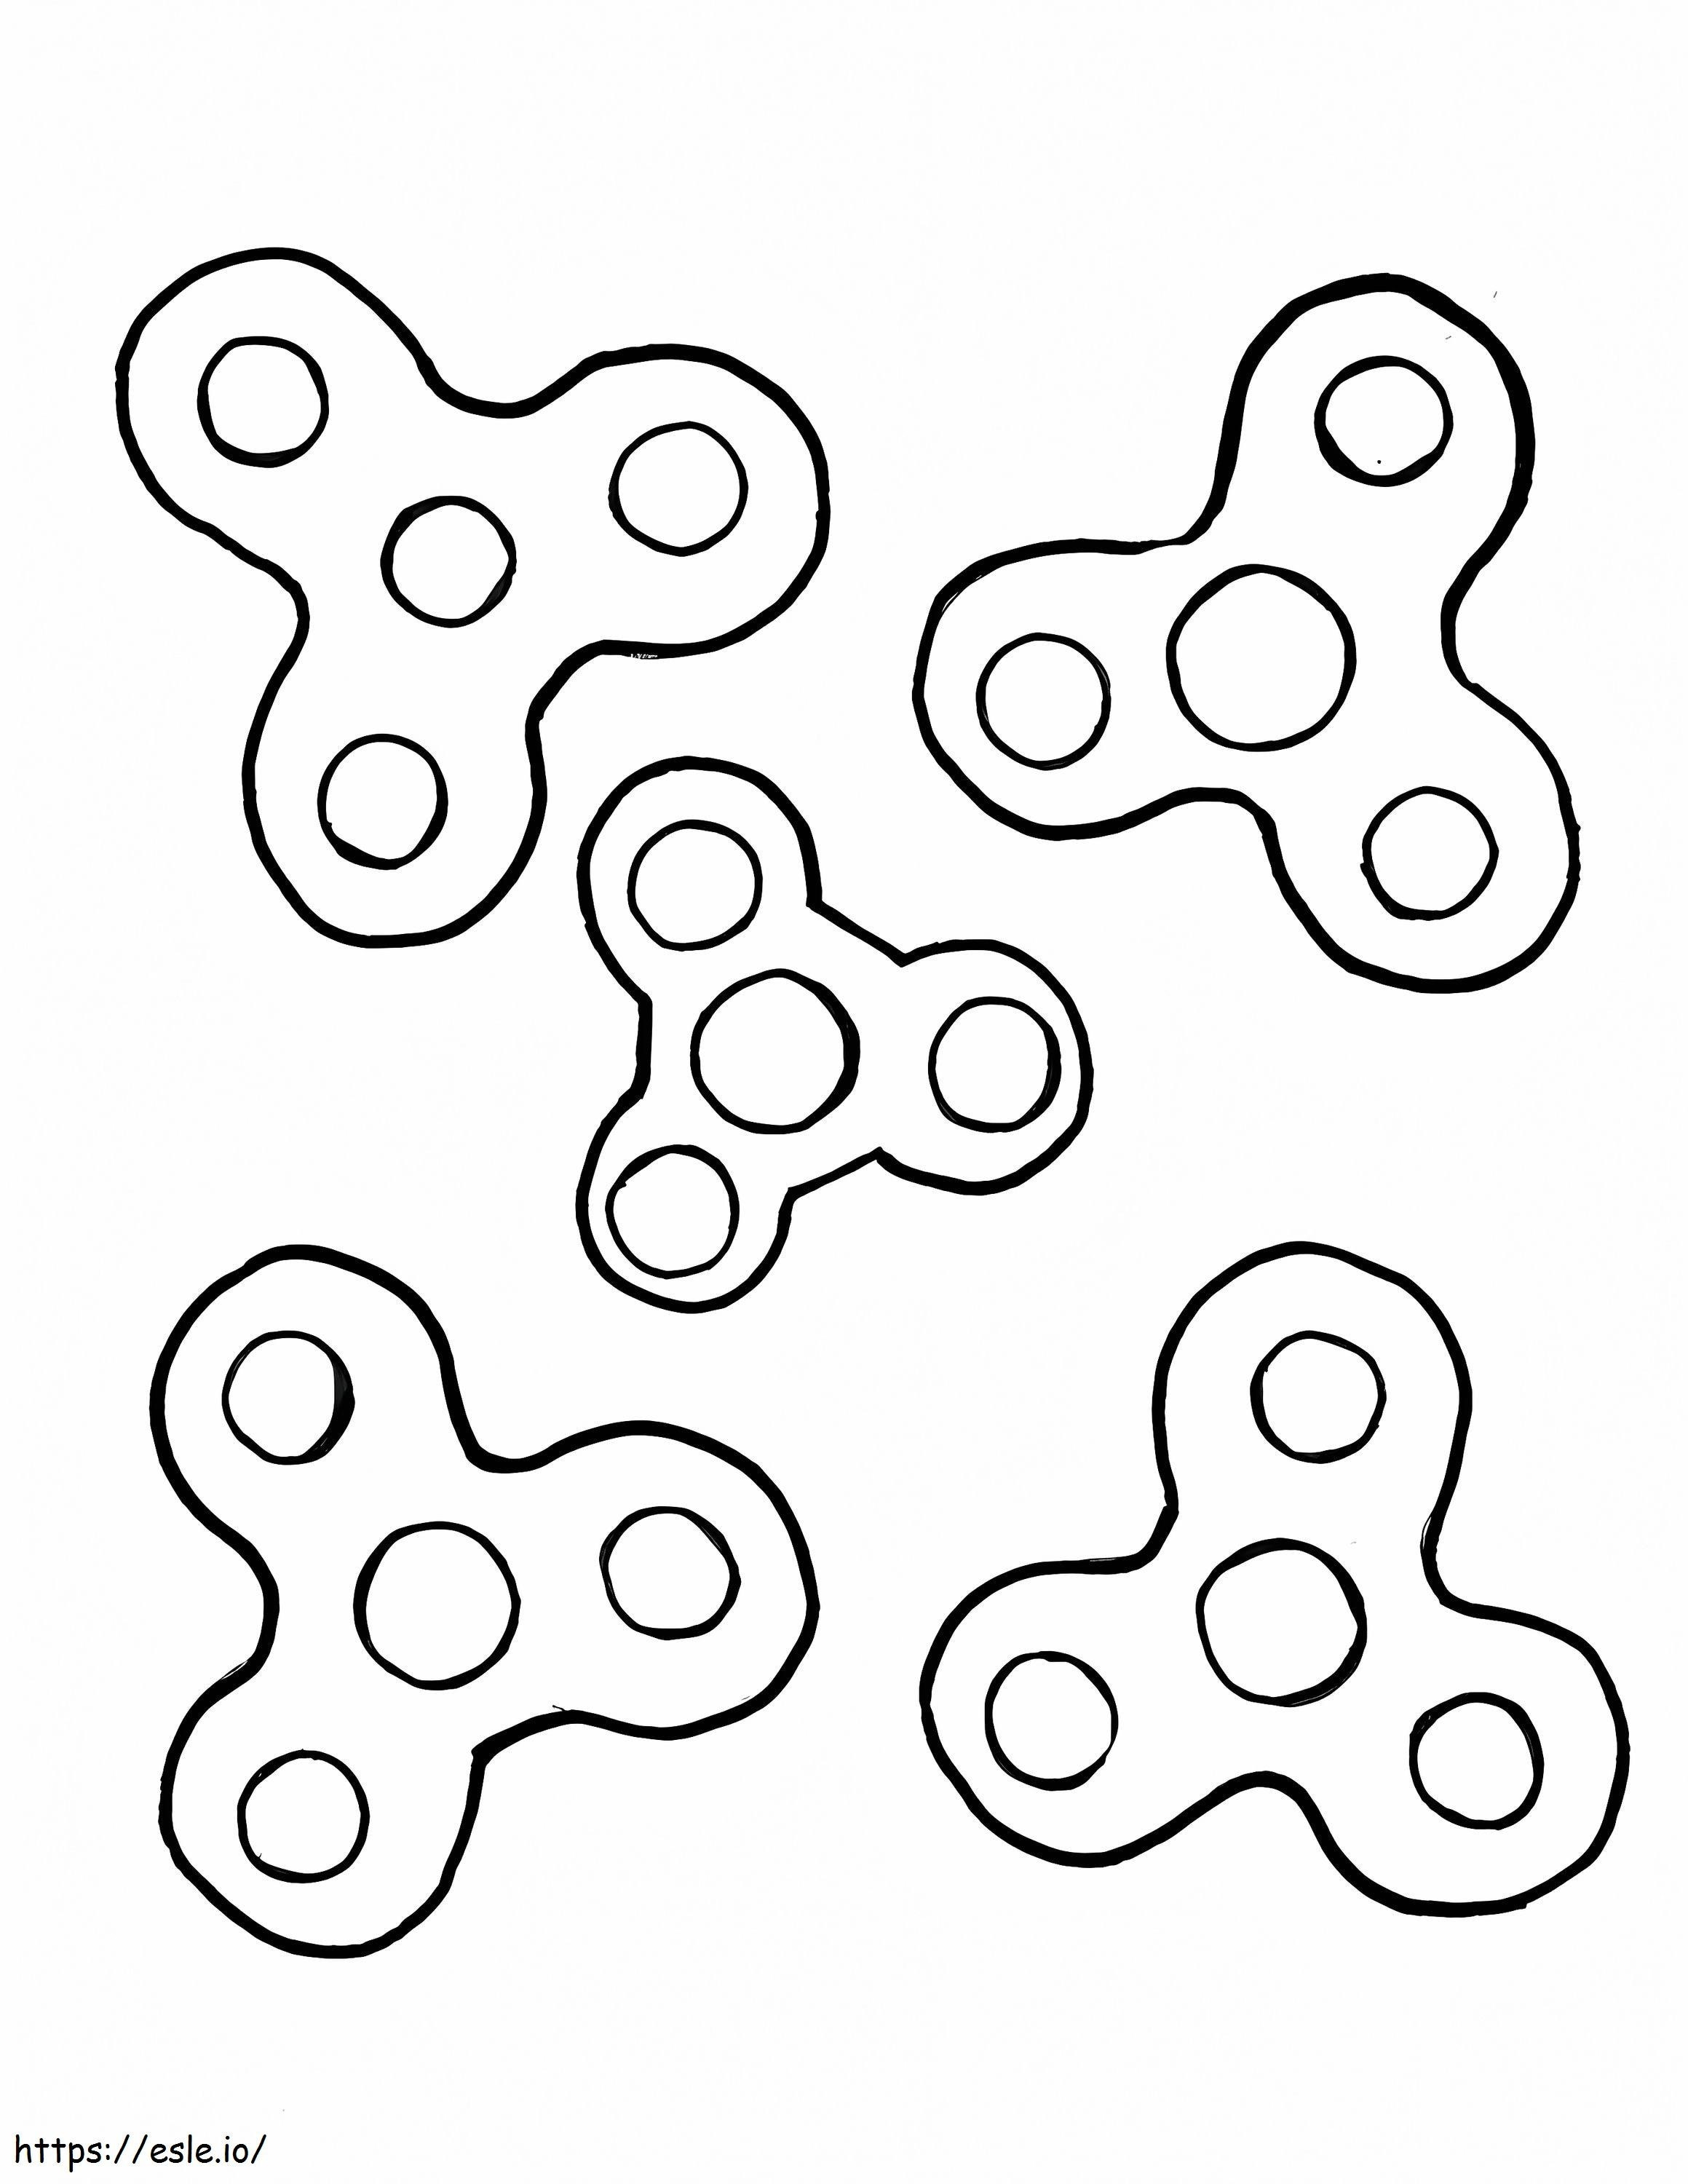 Fidget Spinner coloring page